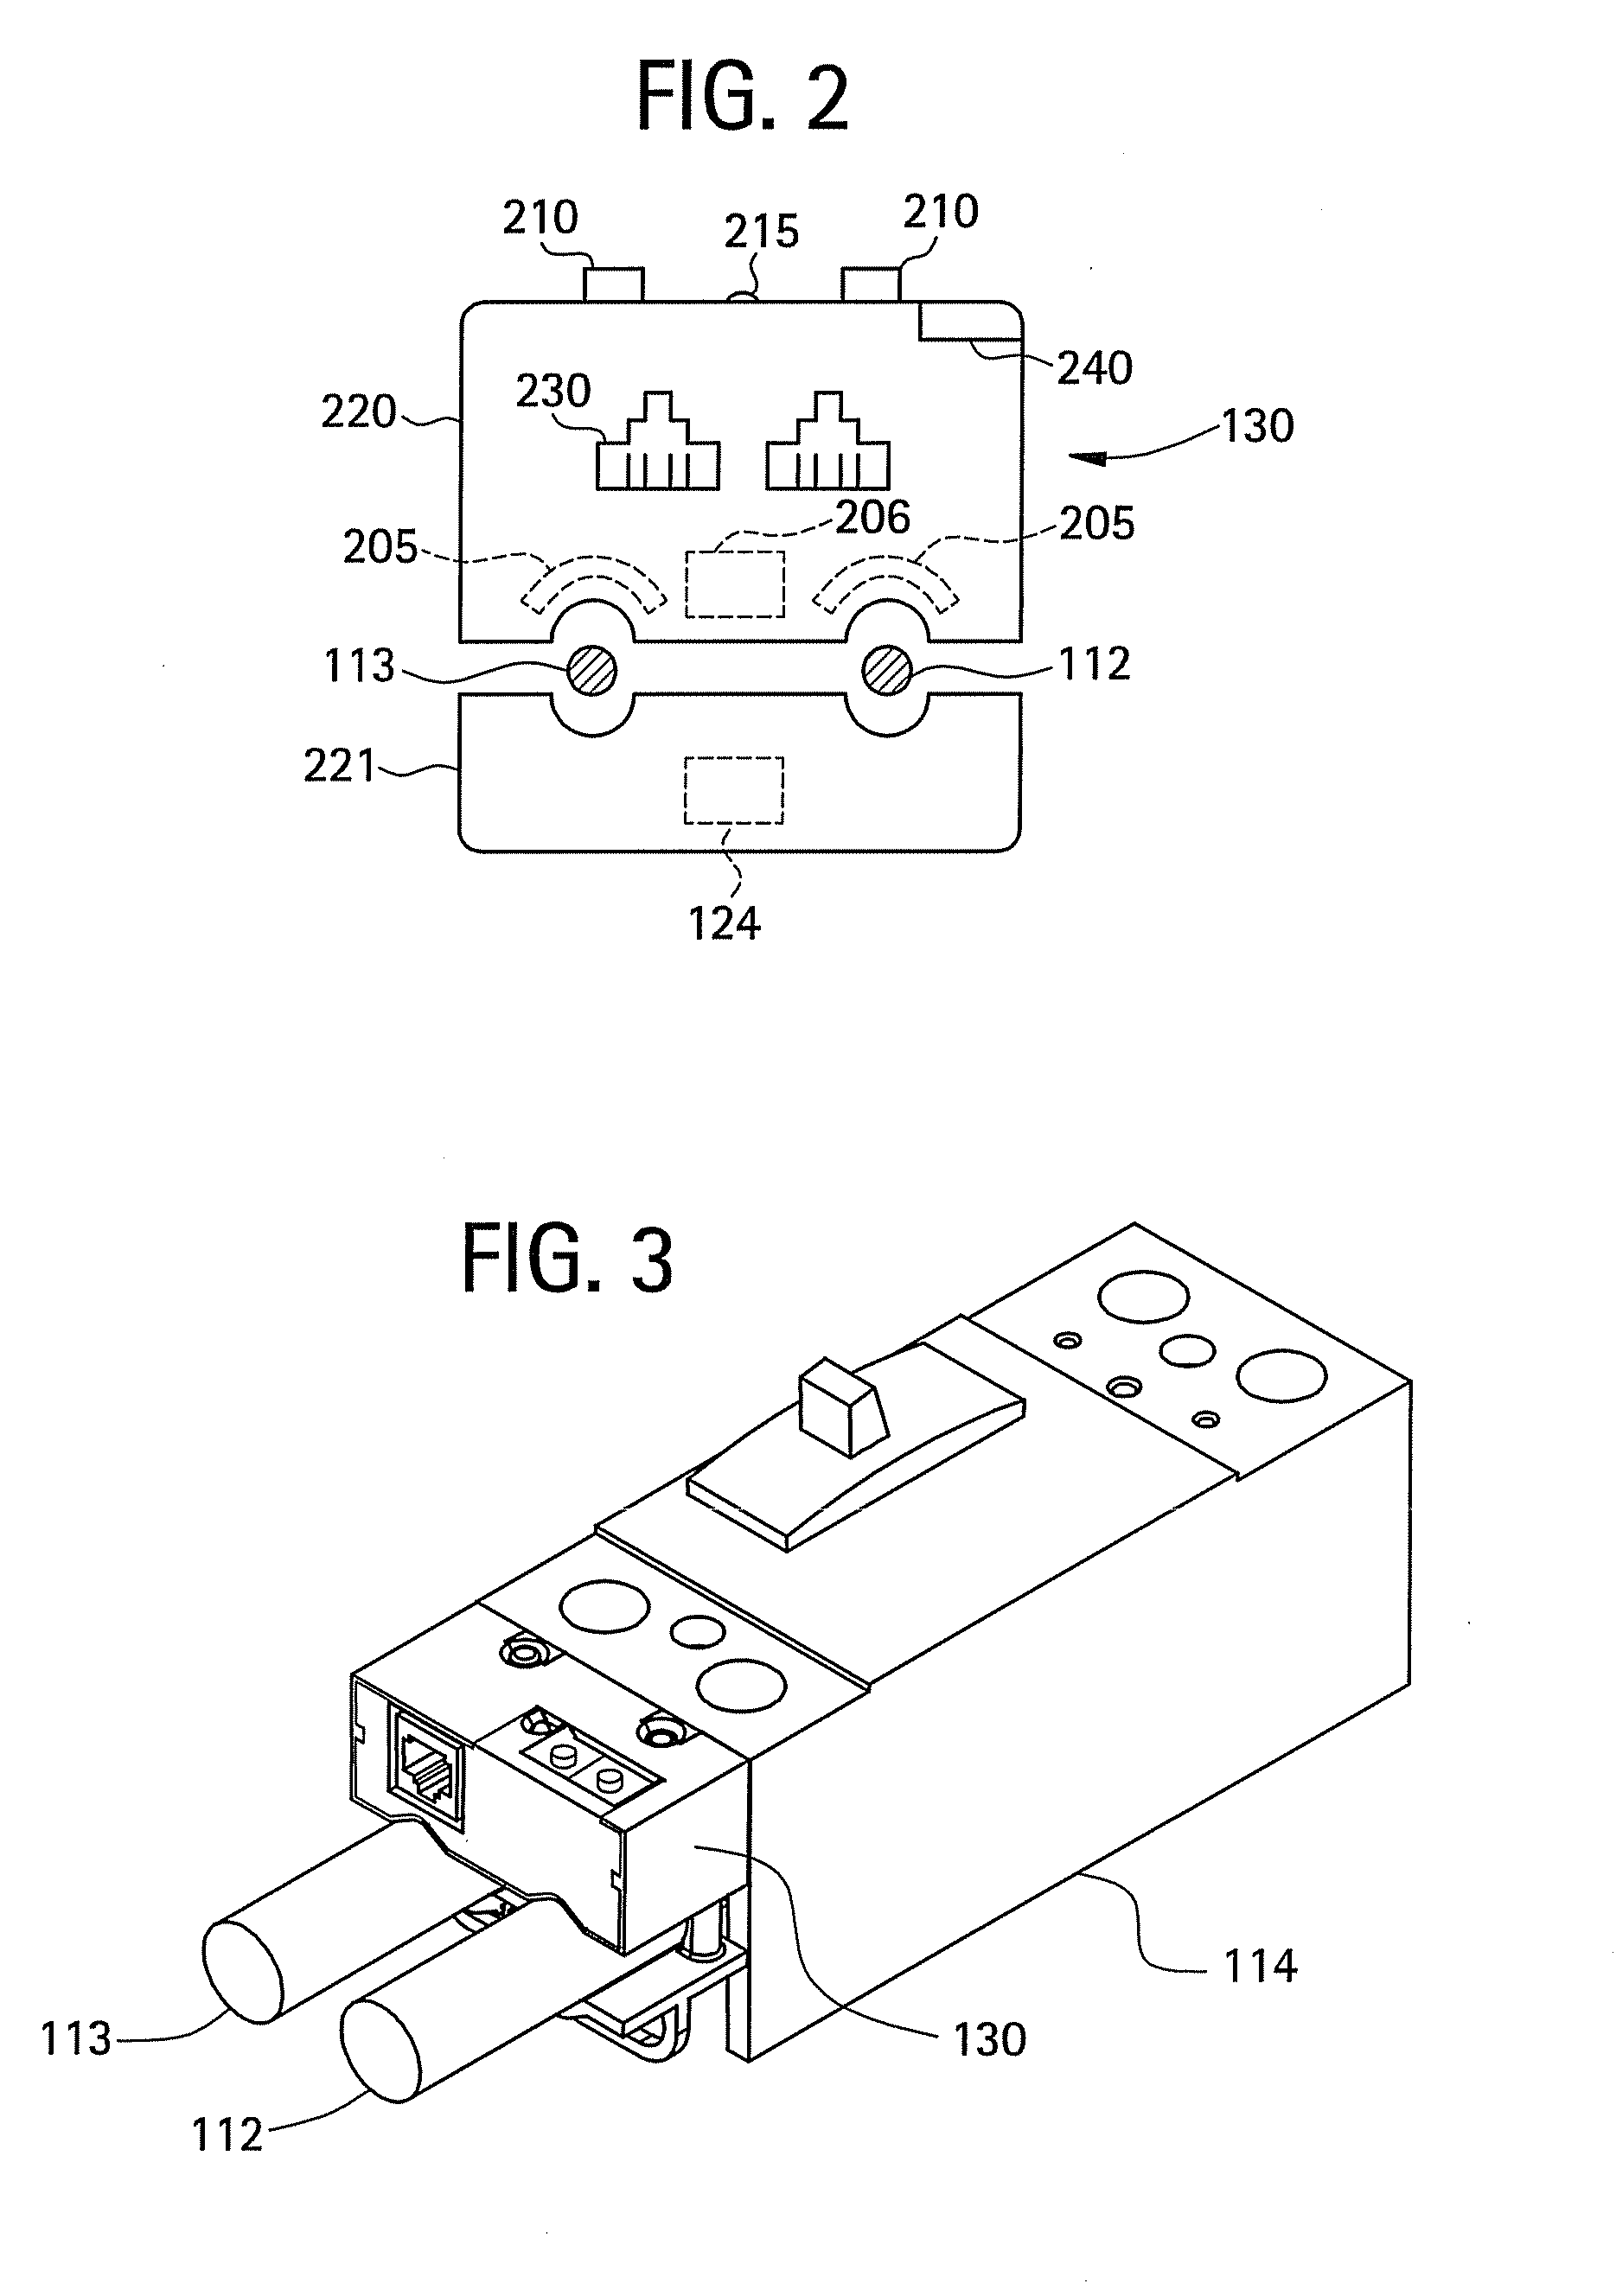 Current Sensing Module and Assembly Method Thereof